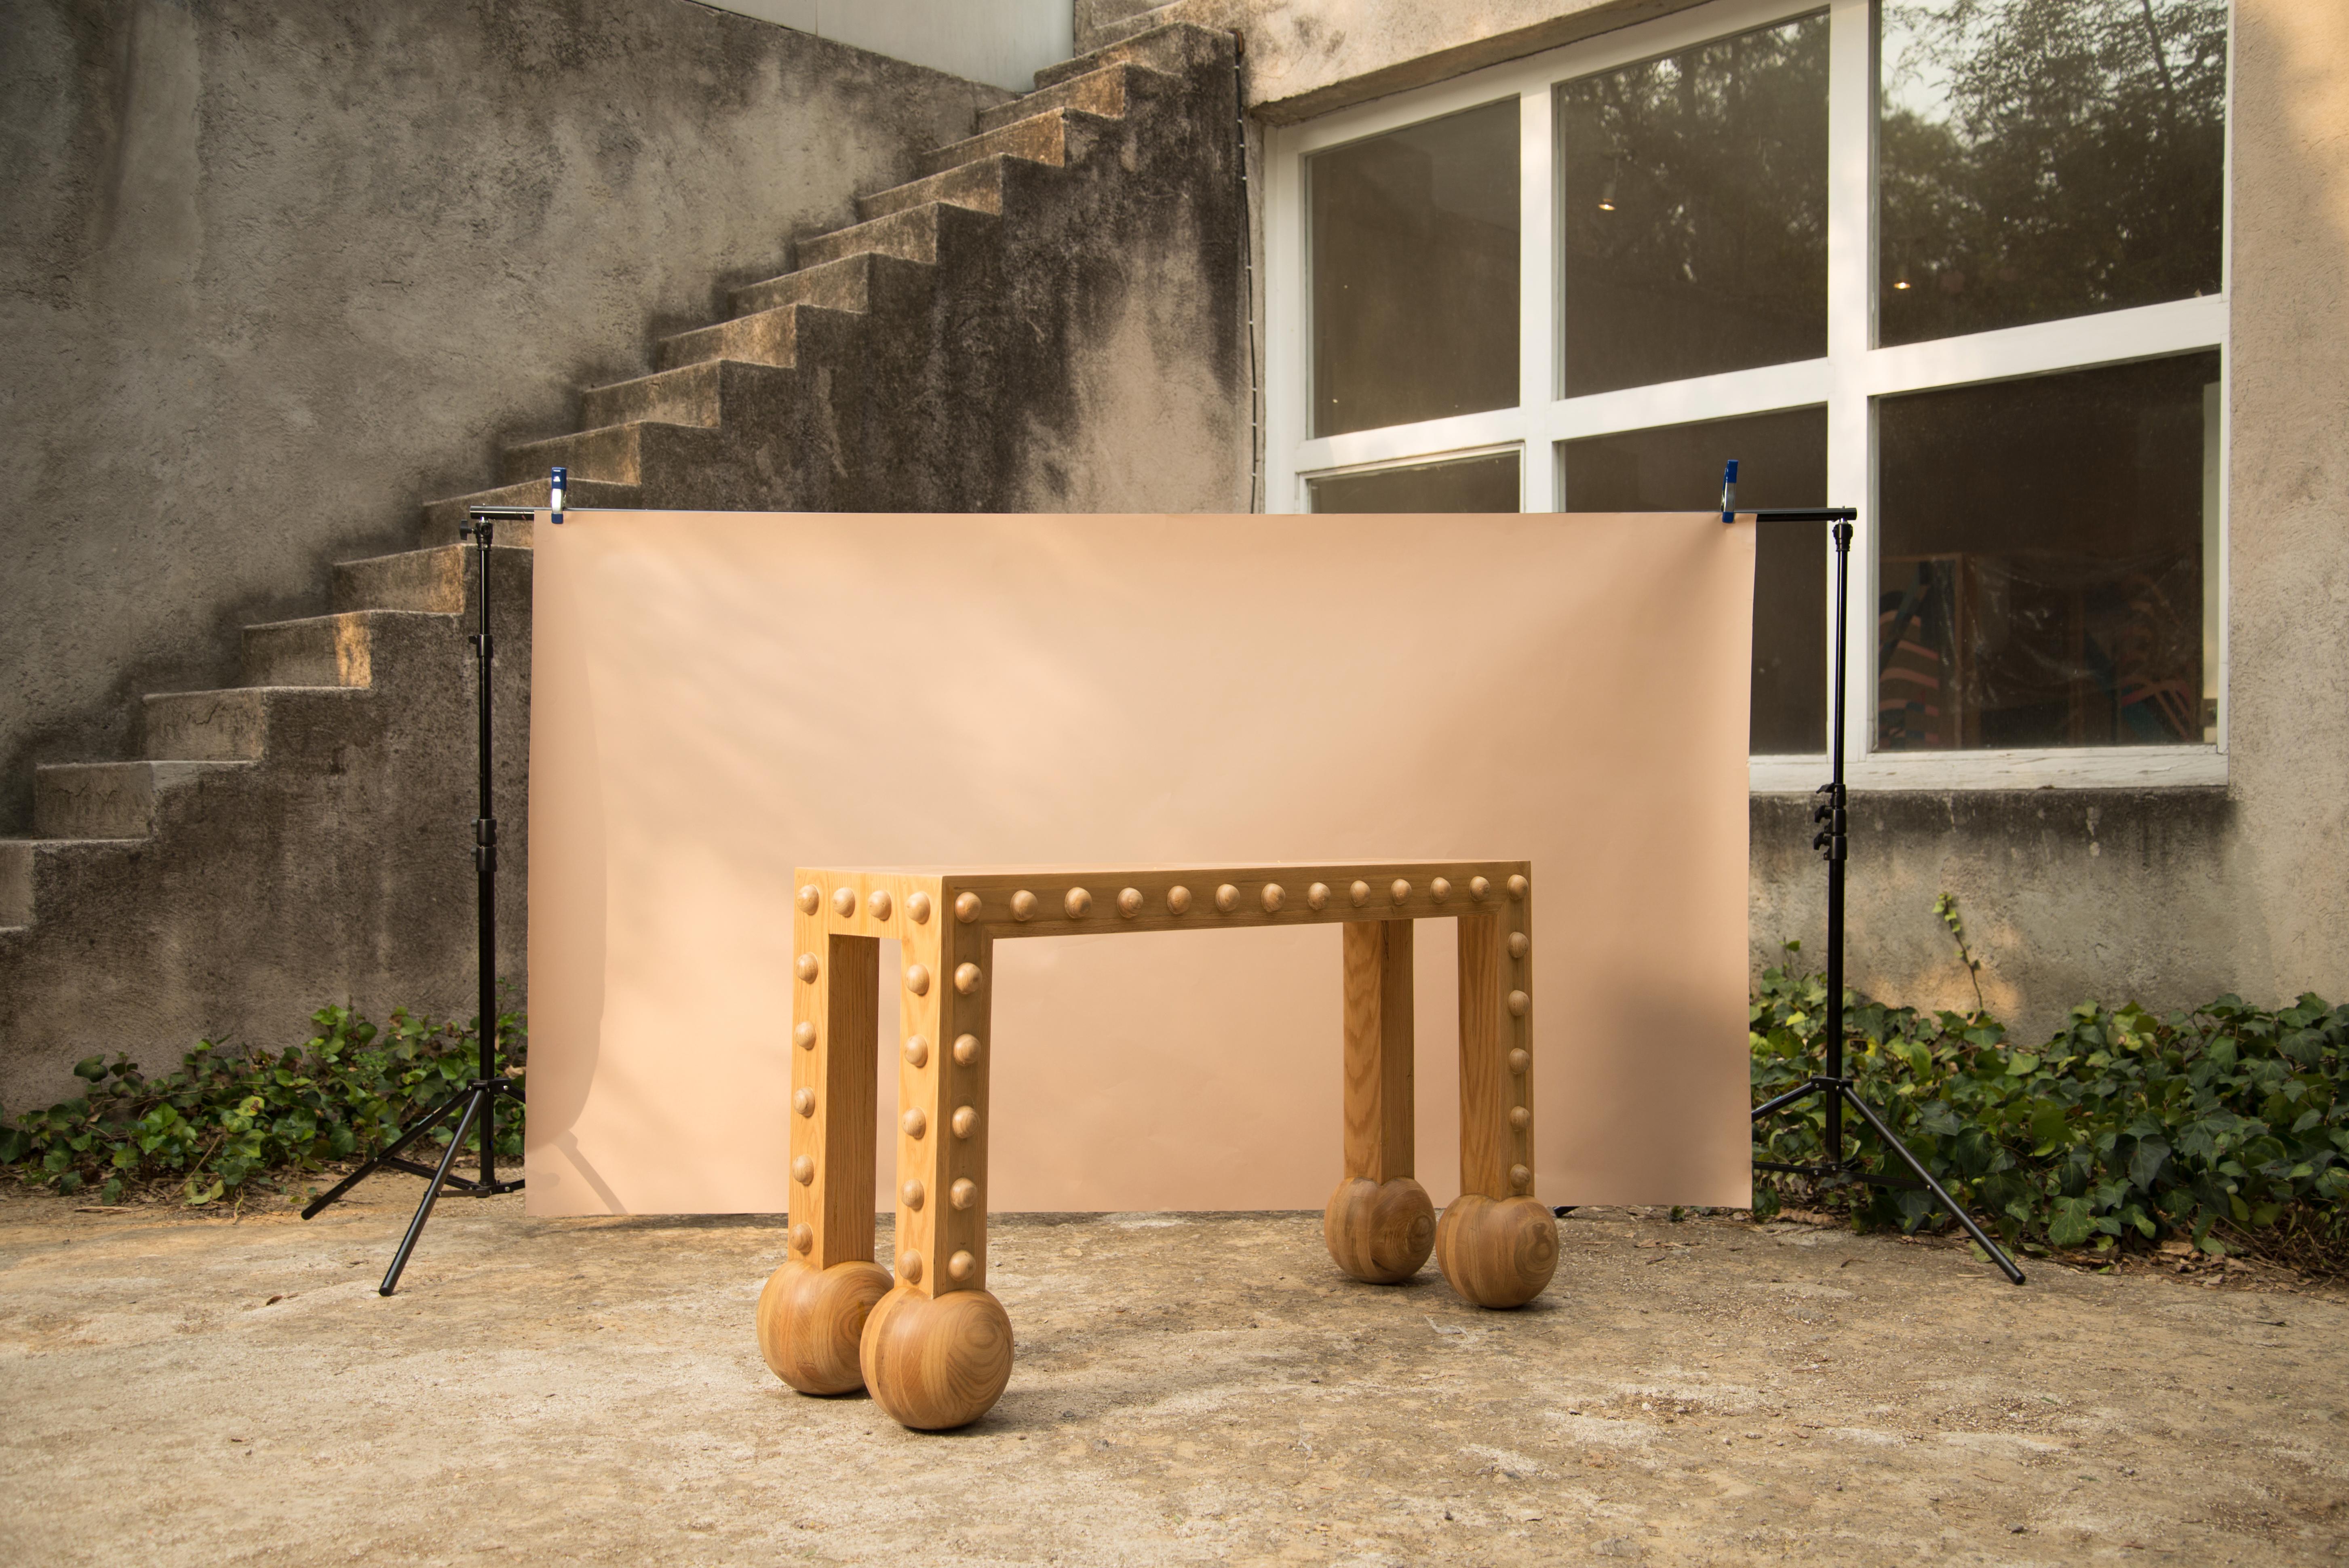 Jaguarcito console table by Andres Gutierrez.
Dimensions: D35 x W120 x H75 cm.
Materials: Solid white oak.
Available in natural or black lacquer finish.

— Inspired by the jaguar—
In the Aztec civilization, the jaguar was worshiped as a deity;